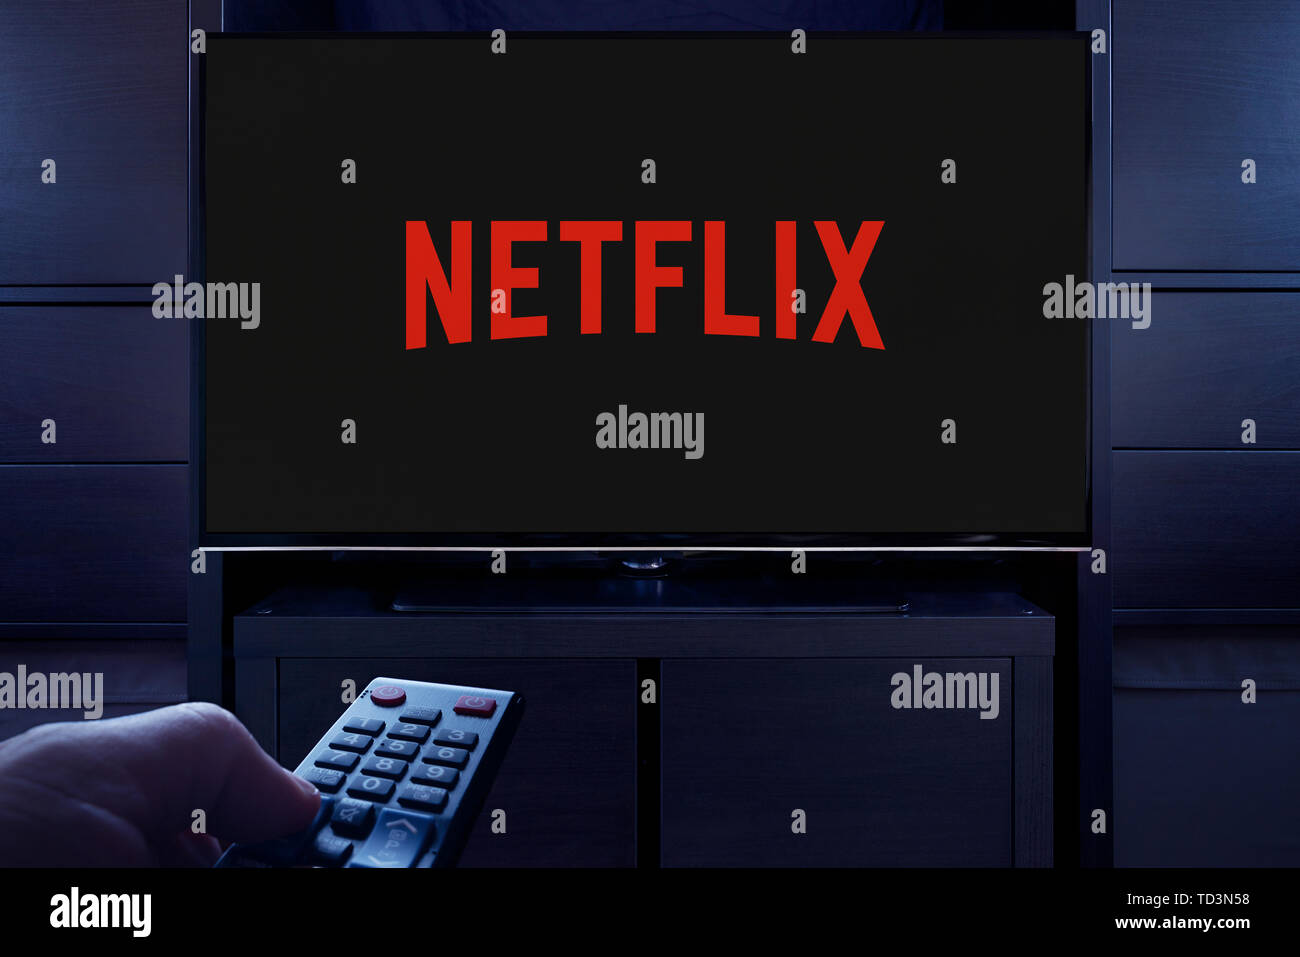 A man points a TV remote at the television which displays the logo for the Netflix on demand video streaming service (Editorial use only). Stock Photo